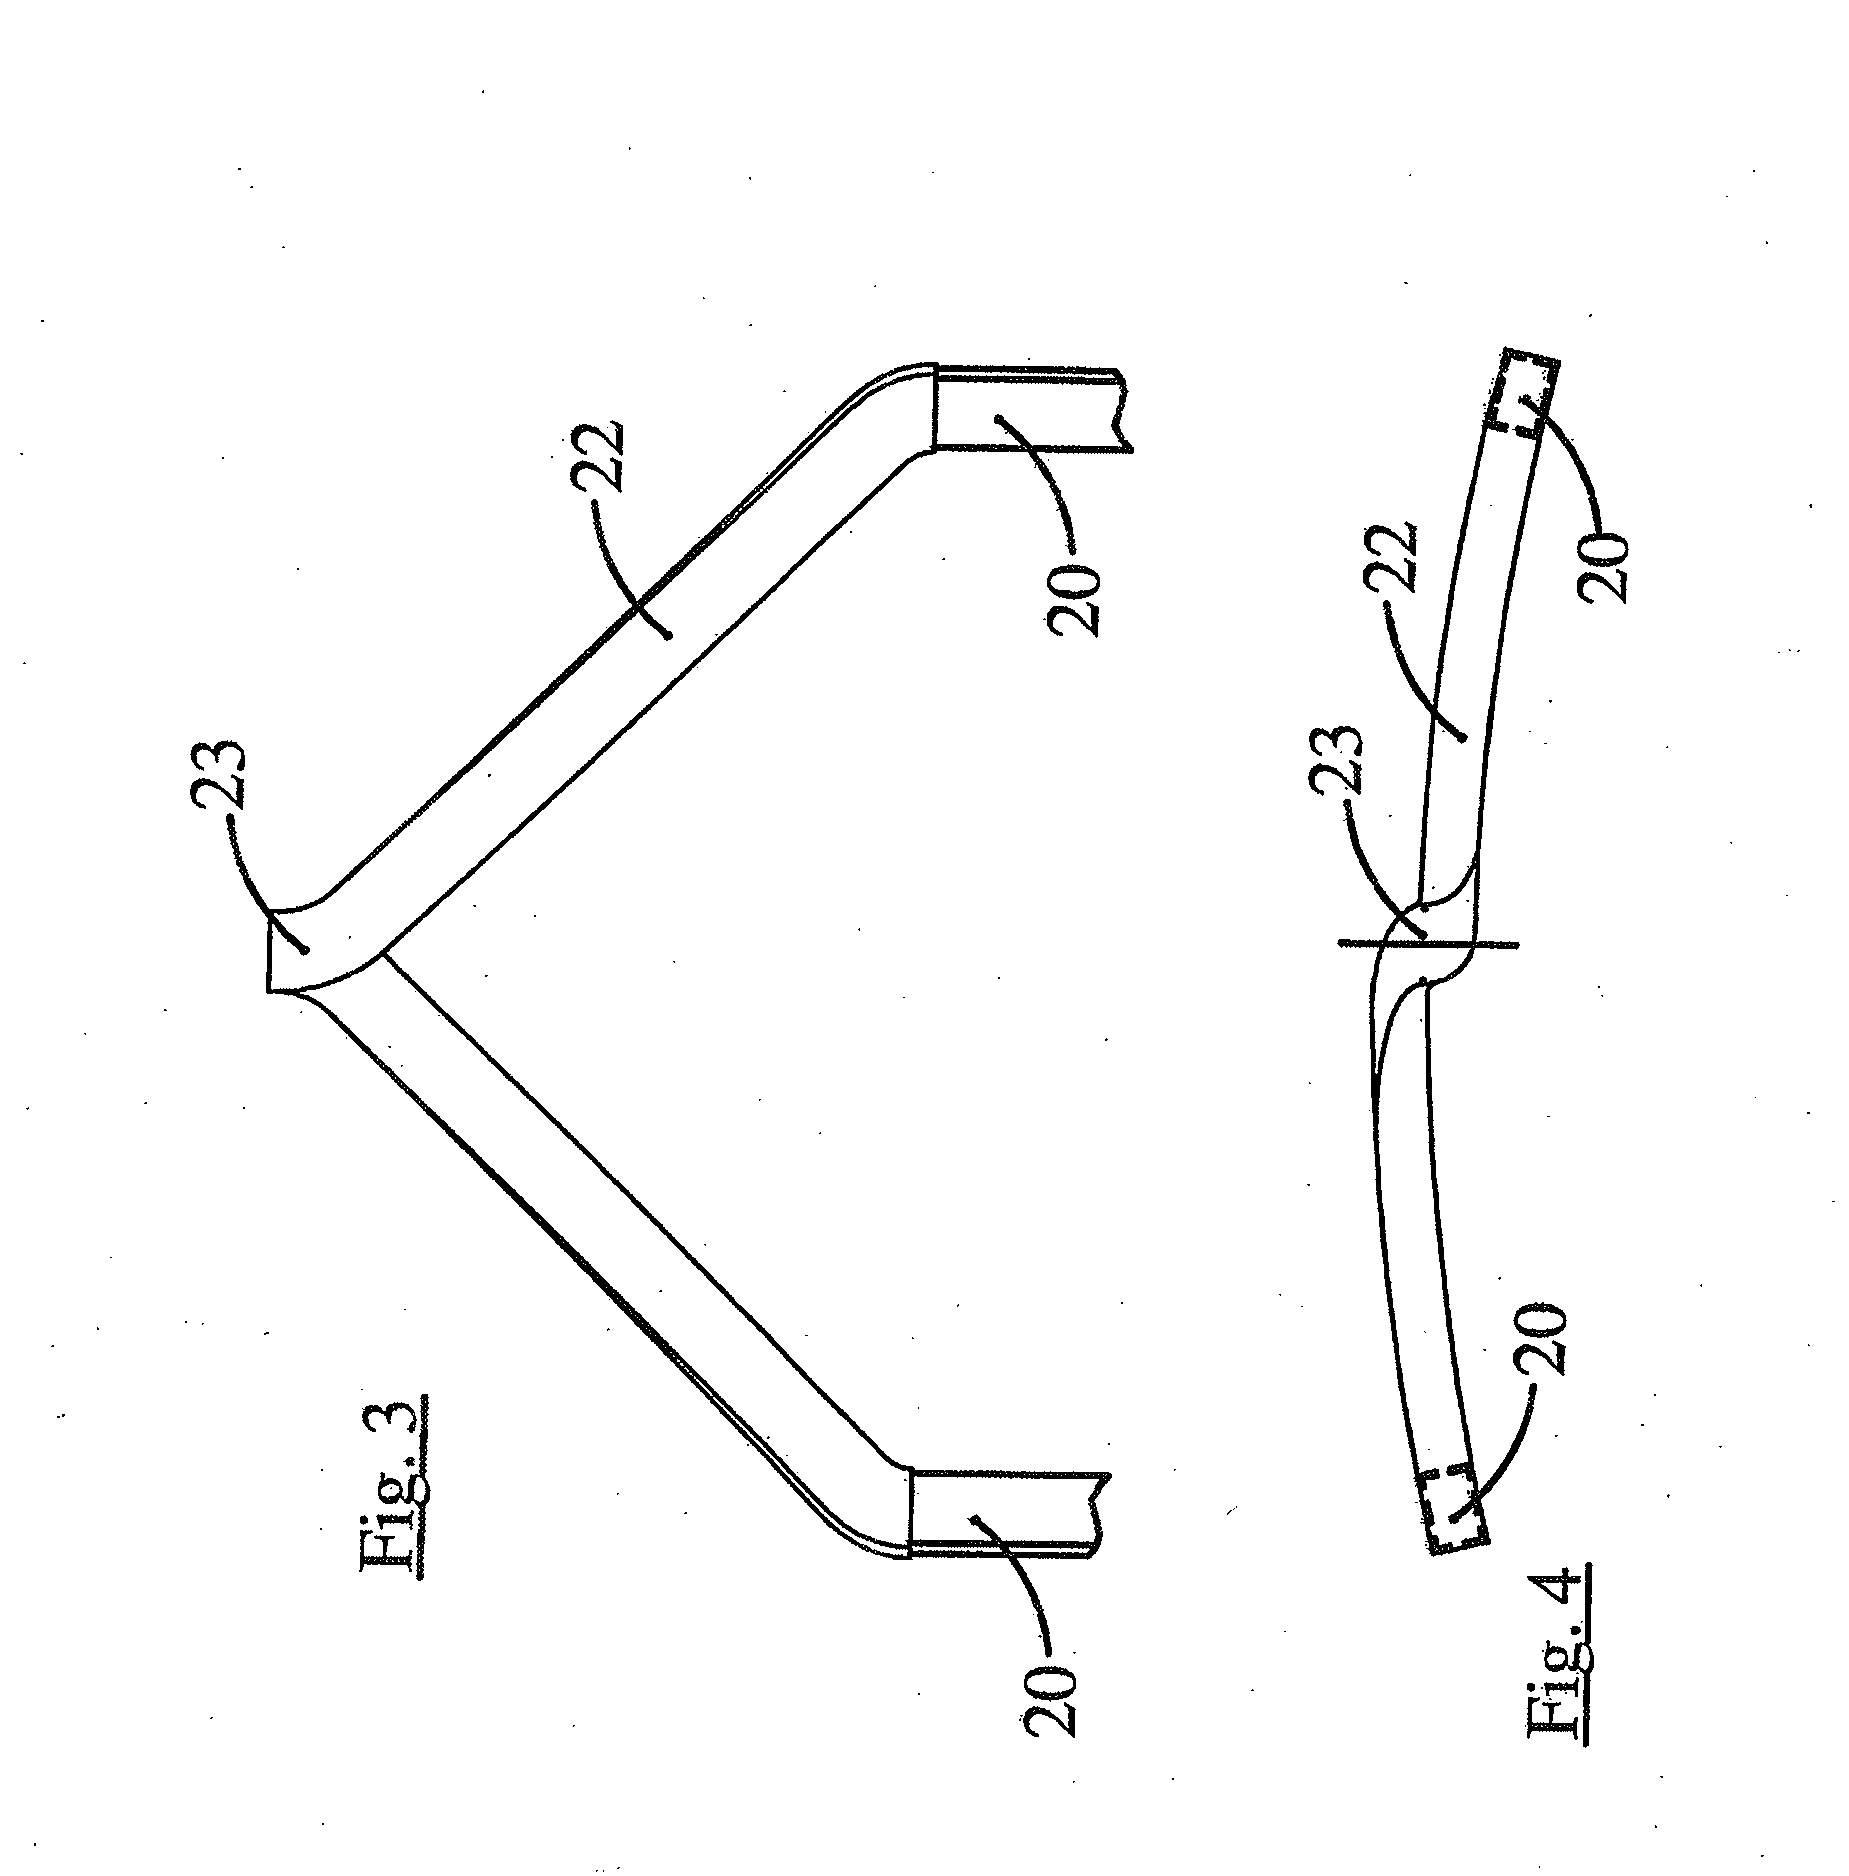 Stator or rotor with interlaced wire groups forming an intertwined wave winding